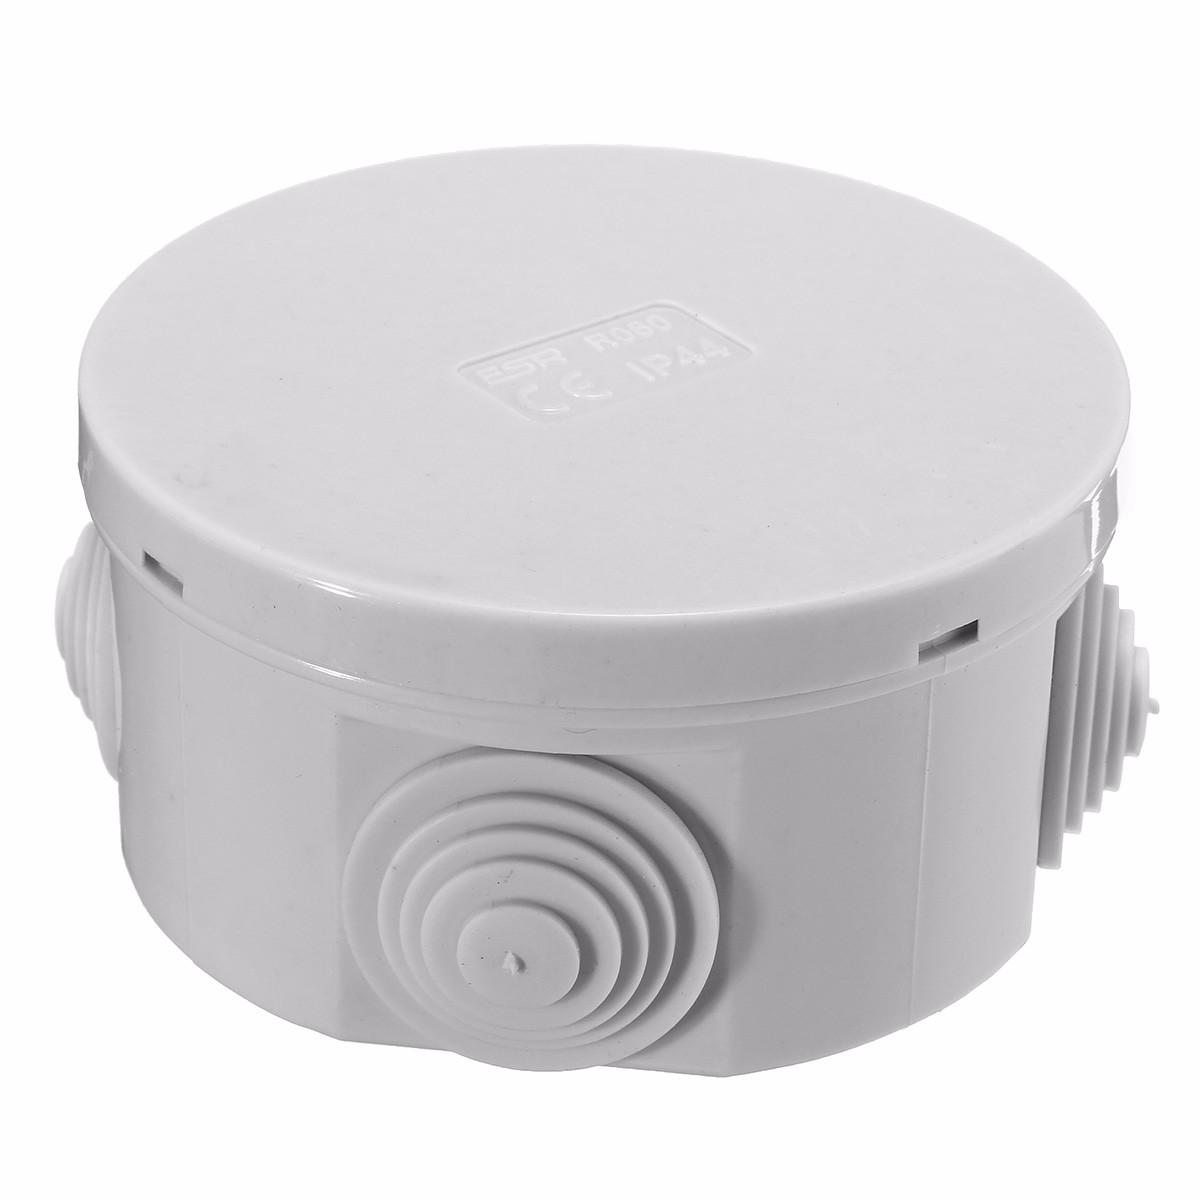 

80x40mm ABS IP44 Waterproof Round Shape Electric Junction Box Electric Project Enclosure Case with 4 Grommets Cable for